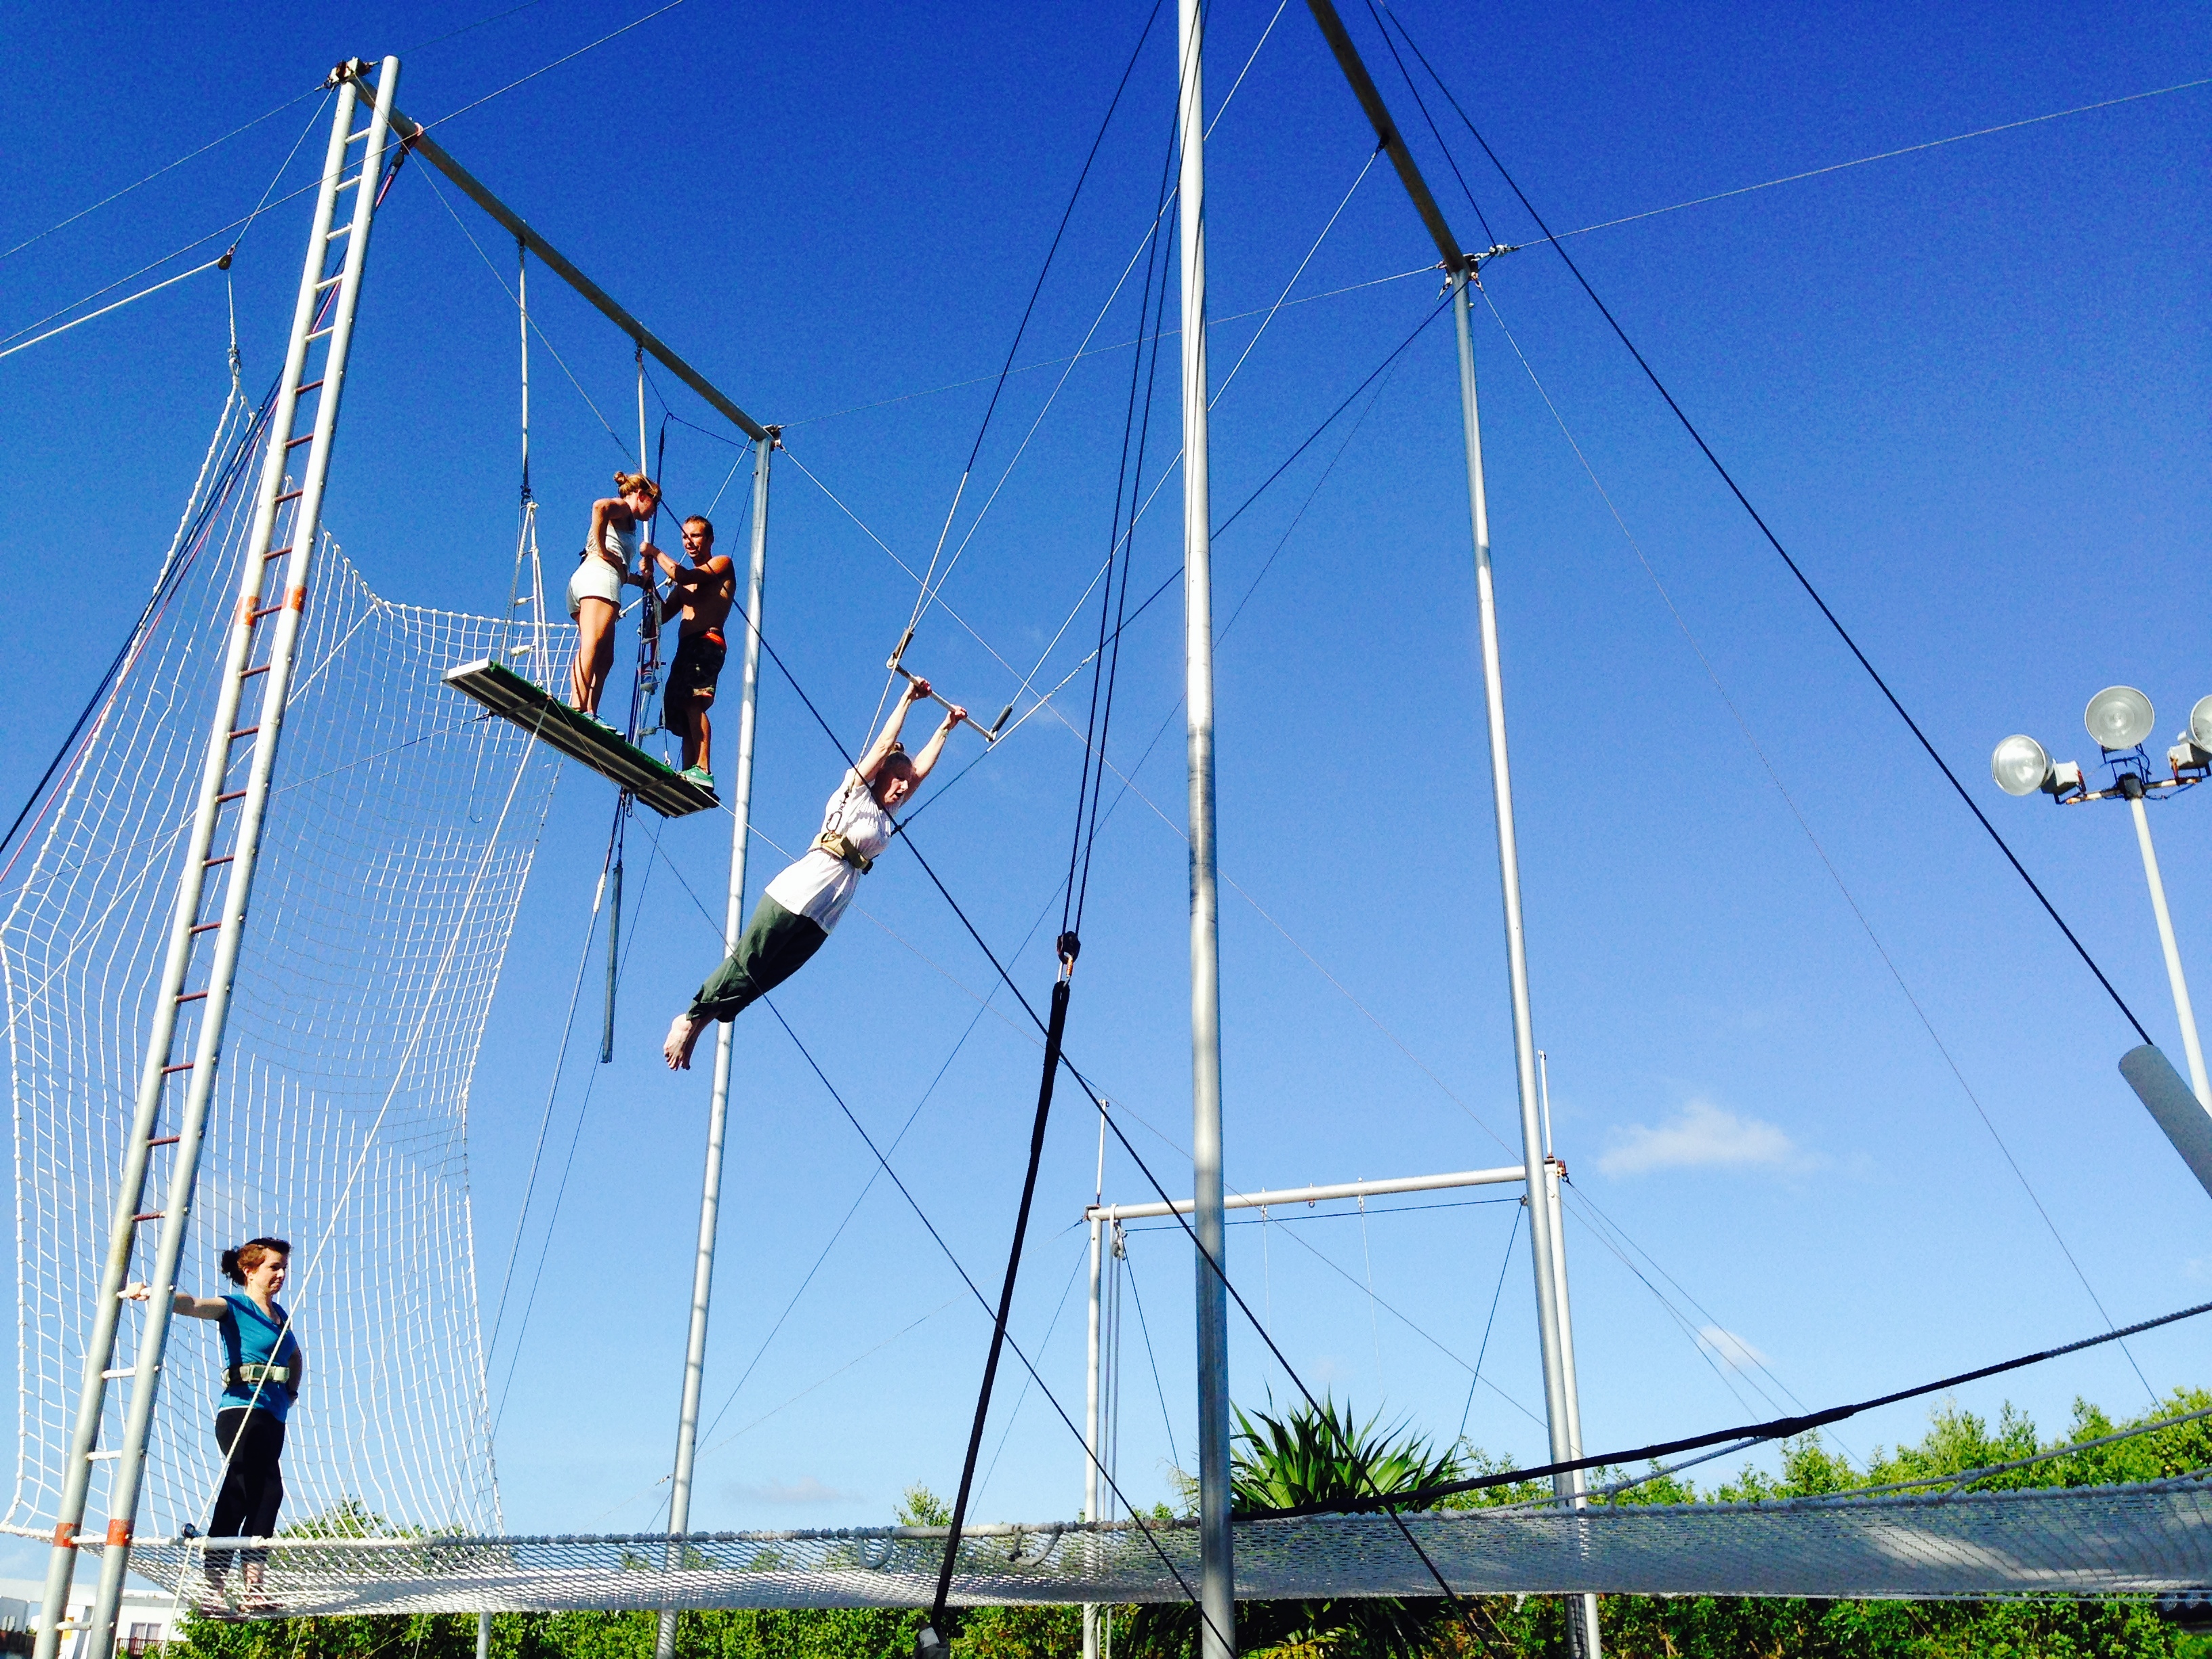 Club Med Cancun | Best Family-Friendly All-Inclusive Resort in Cancun Mexico | Trapeze at Club Med